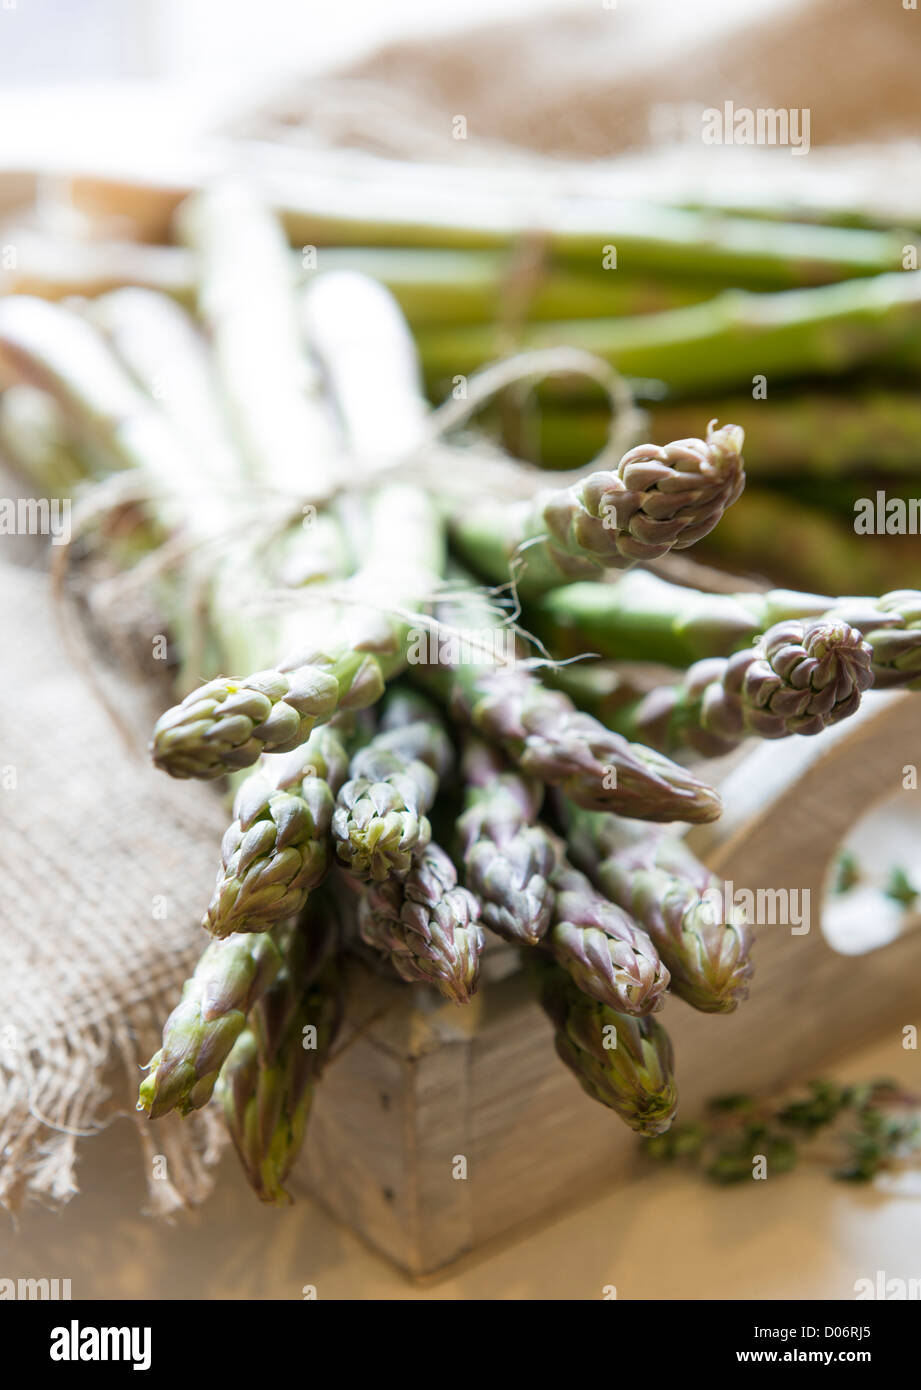 Freshly picked asparagus on a rustic tray Stock Photo